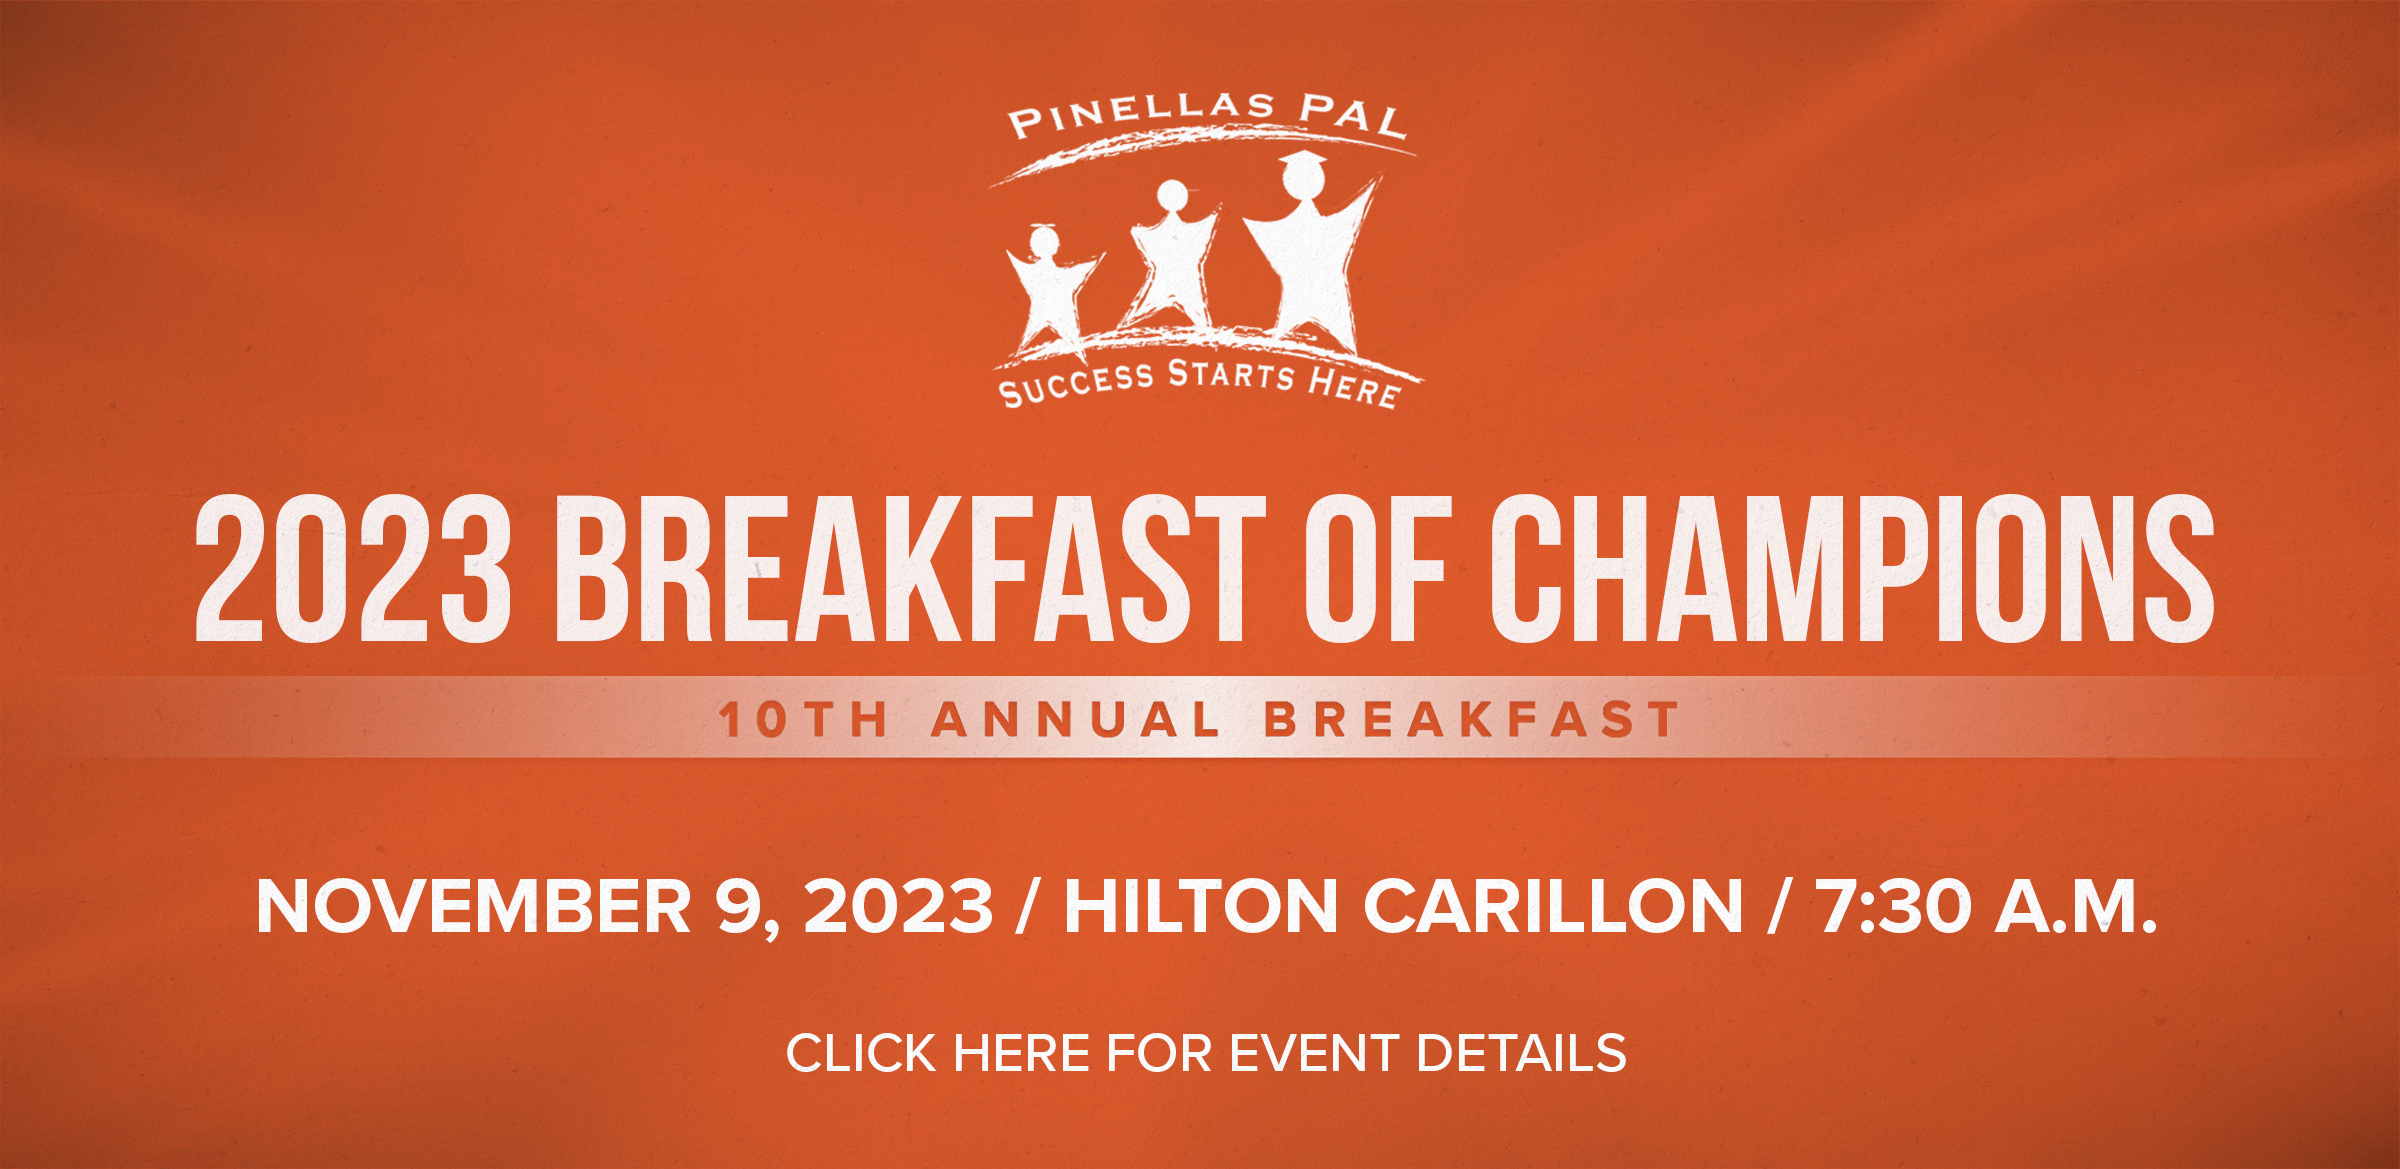 2023 Breakfast of Champions, 10th Annual Breakfast; November 9, 2023, Hilton Carillon, 7:30 A.M.; Click Here for Details